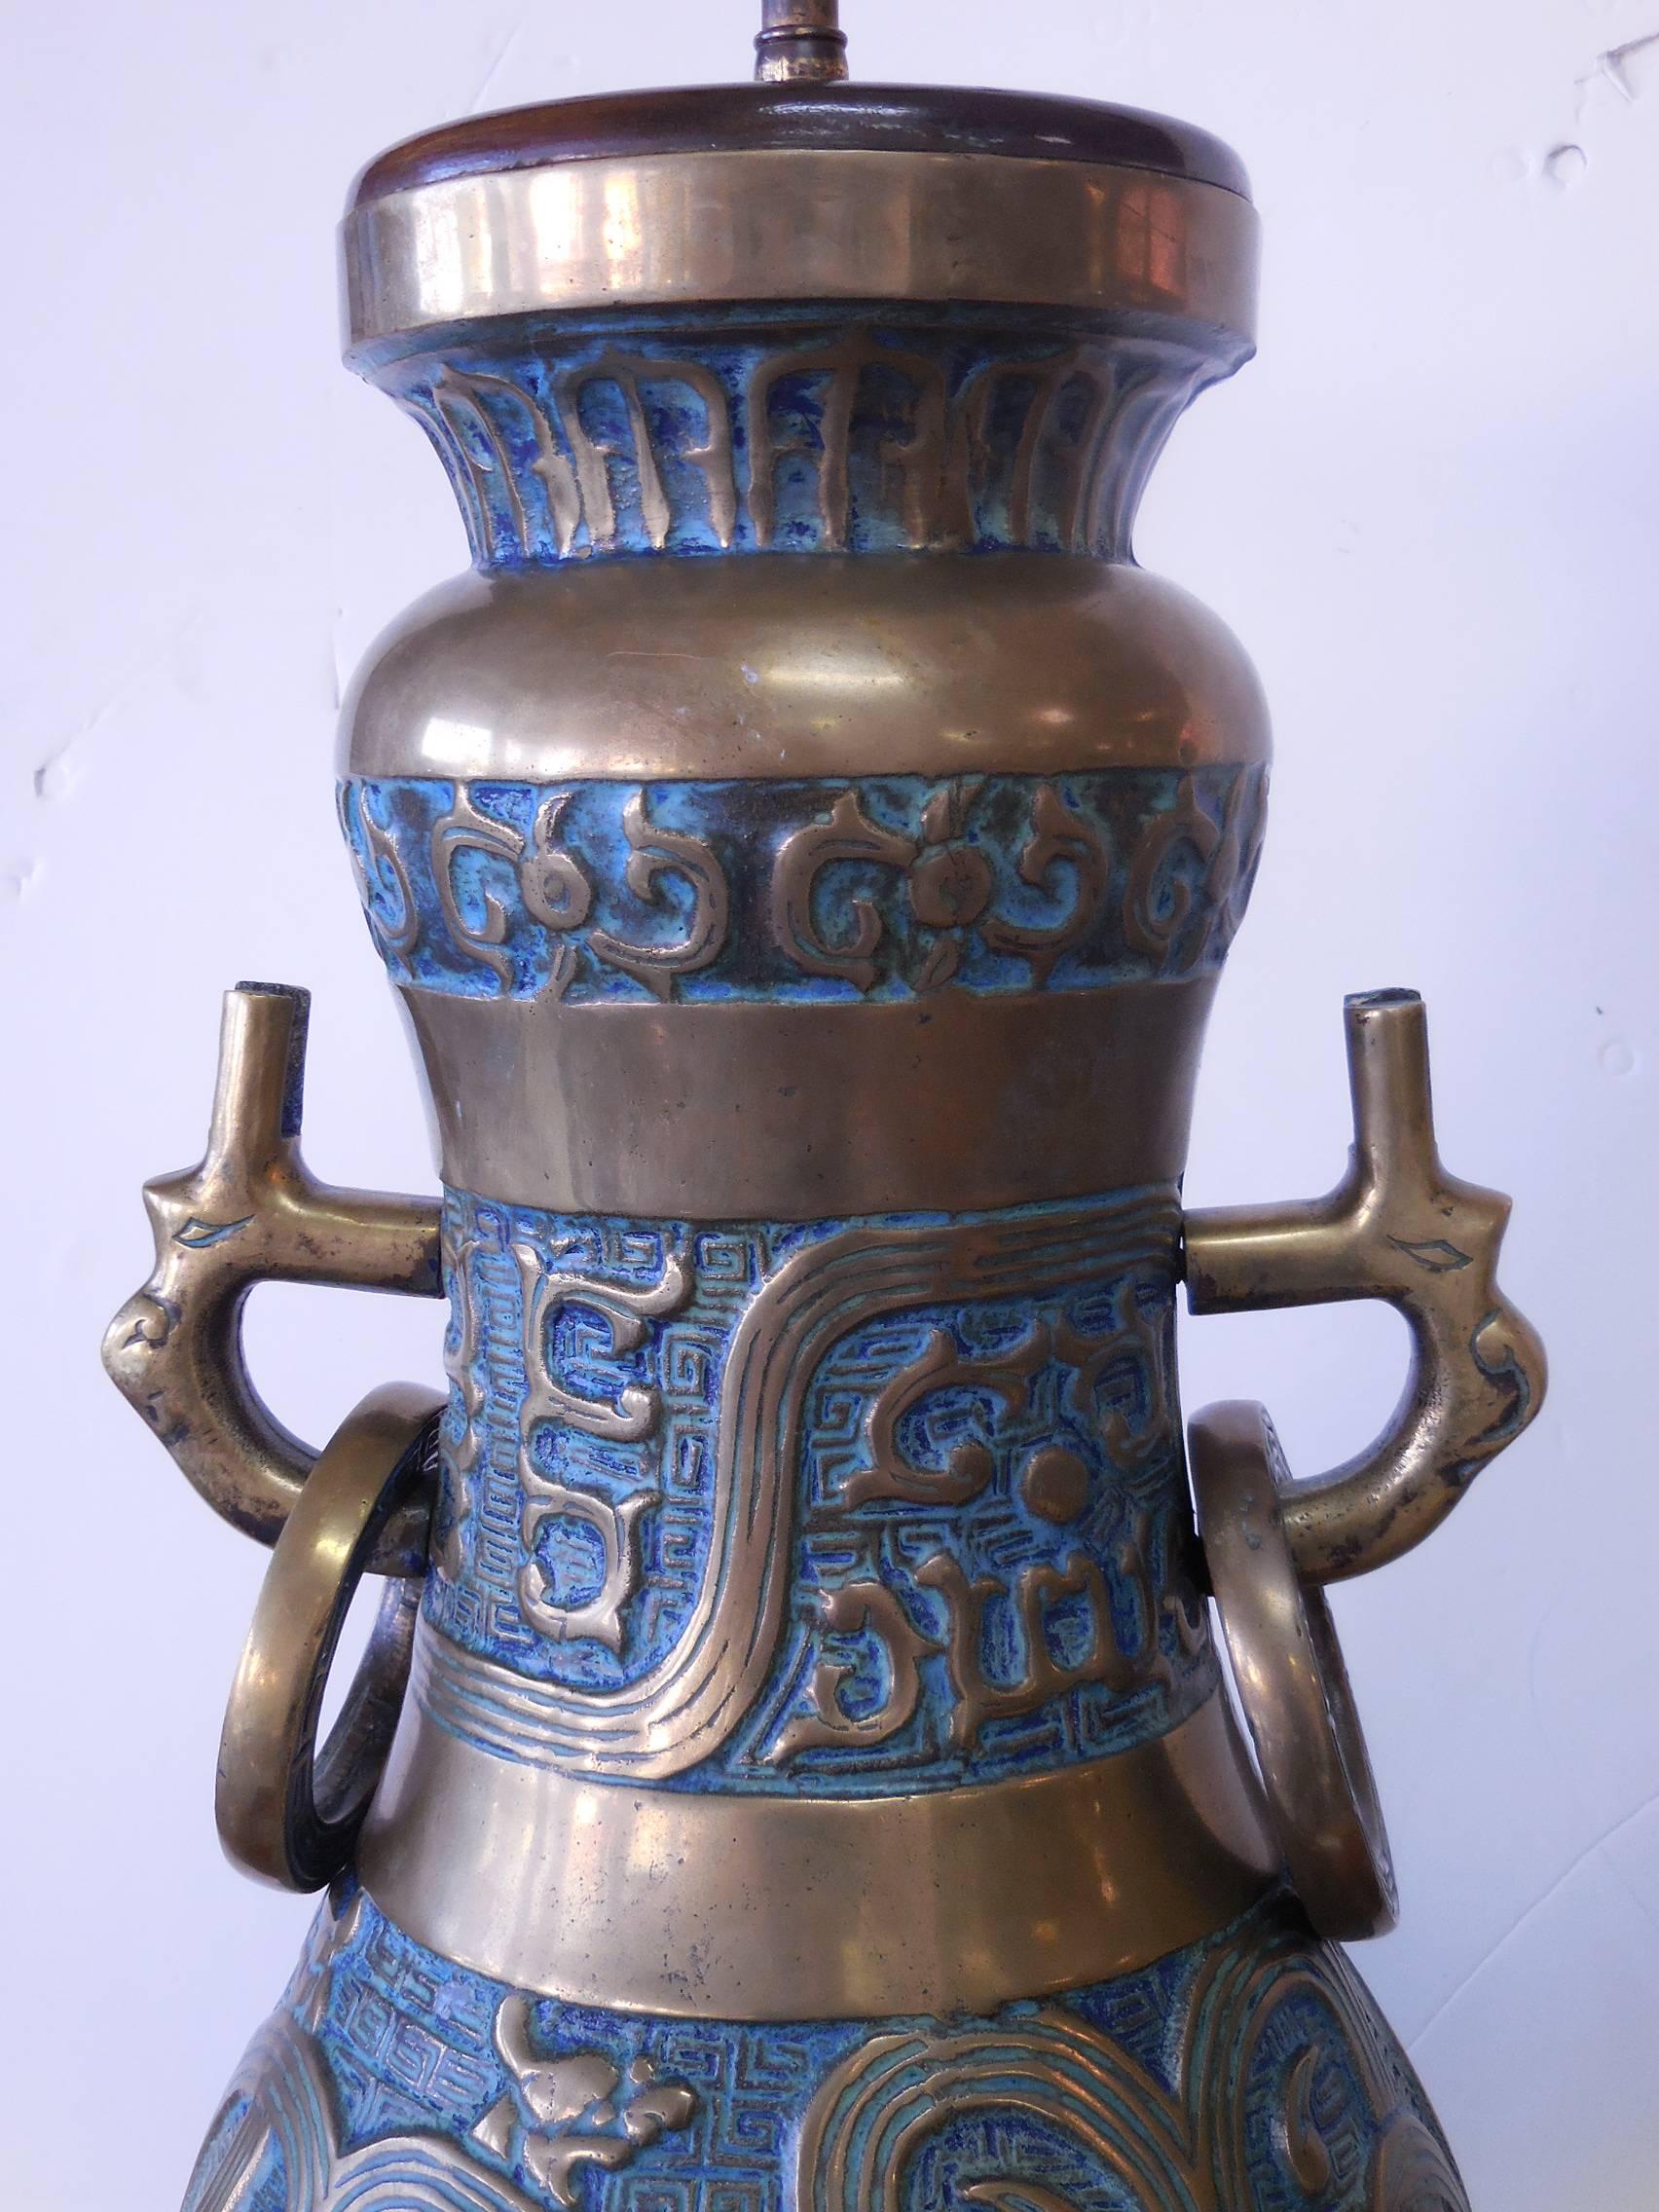 Stunning pair of lamps. Heavy brass casting with beautiful turquoise enamel. Large rings with Greek key design flank the large urns. Signed as pictured. 22